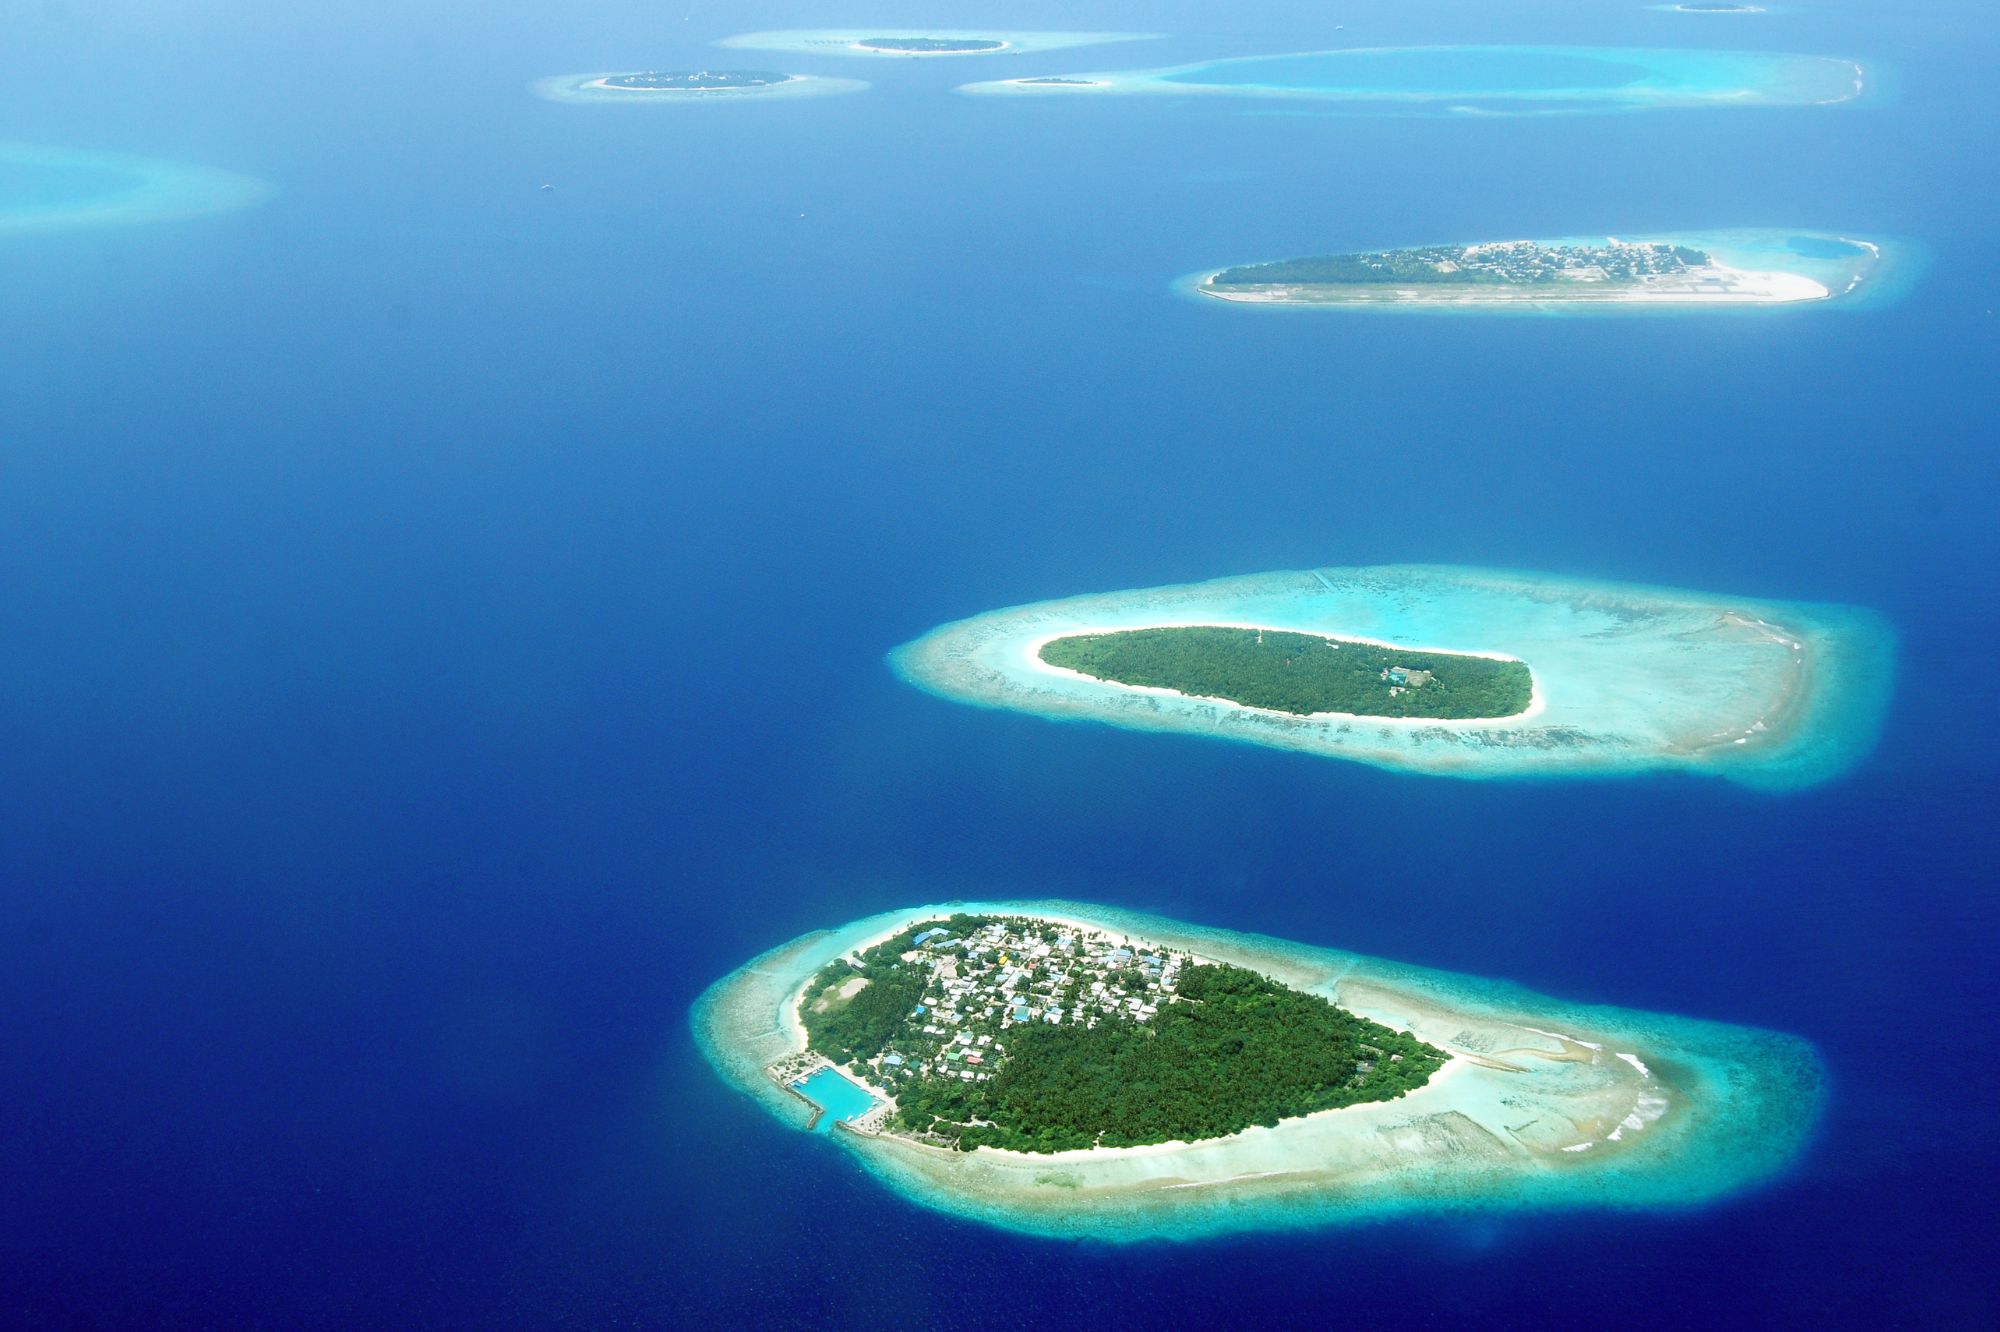 Above: The Republic of Maldives consists of 1,192 tiny islands in 26 atolls spread from north to south. With the islands surrounded by the ocean, the greatest diversity occurs in marine and coastal environments. [Source] 